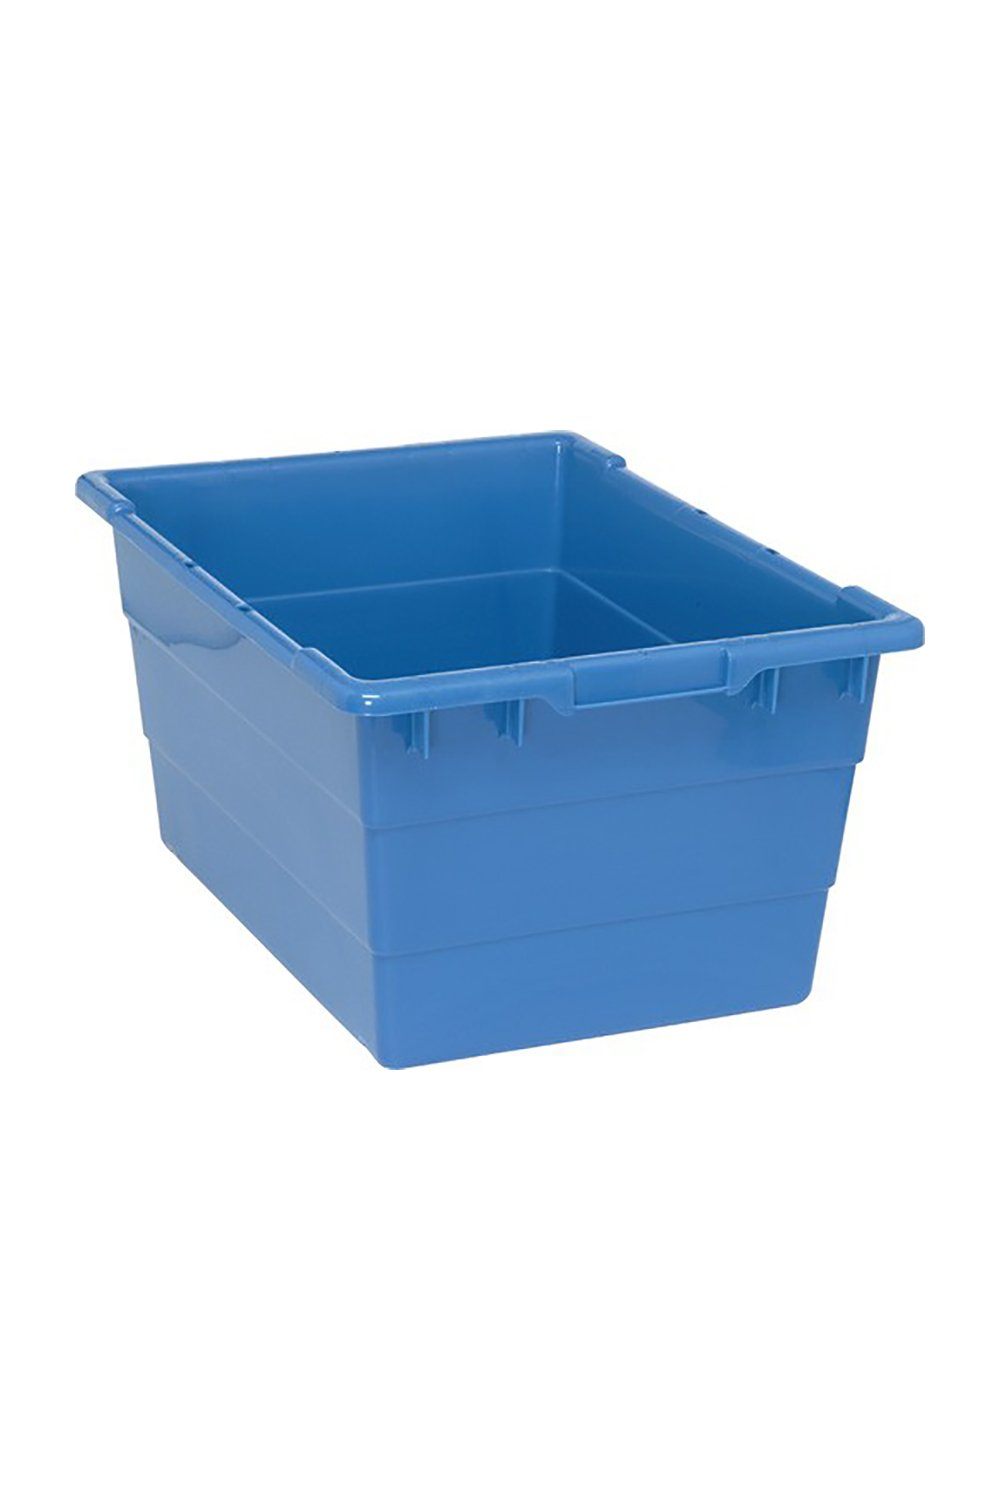 Cross Stack Tub Bins & Containers Acart 23-3/4"L x 17-1/4"W x 12"H Blue 